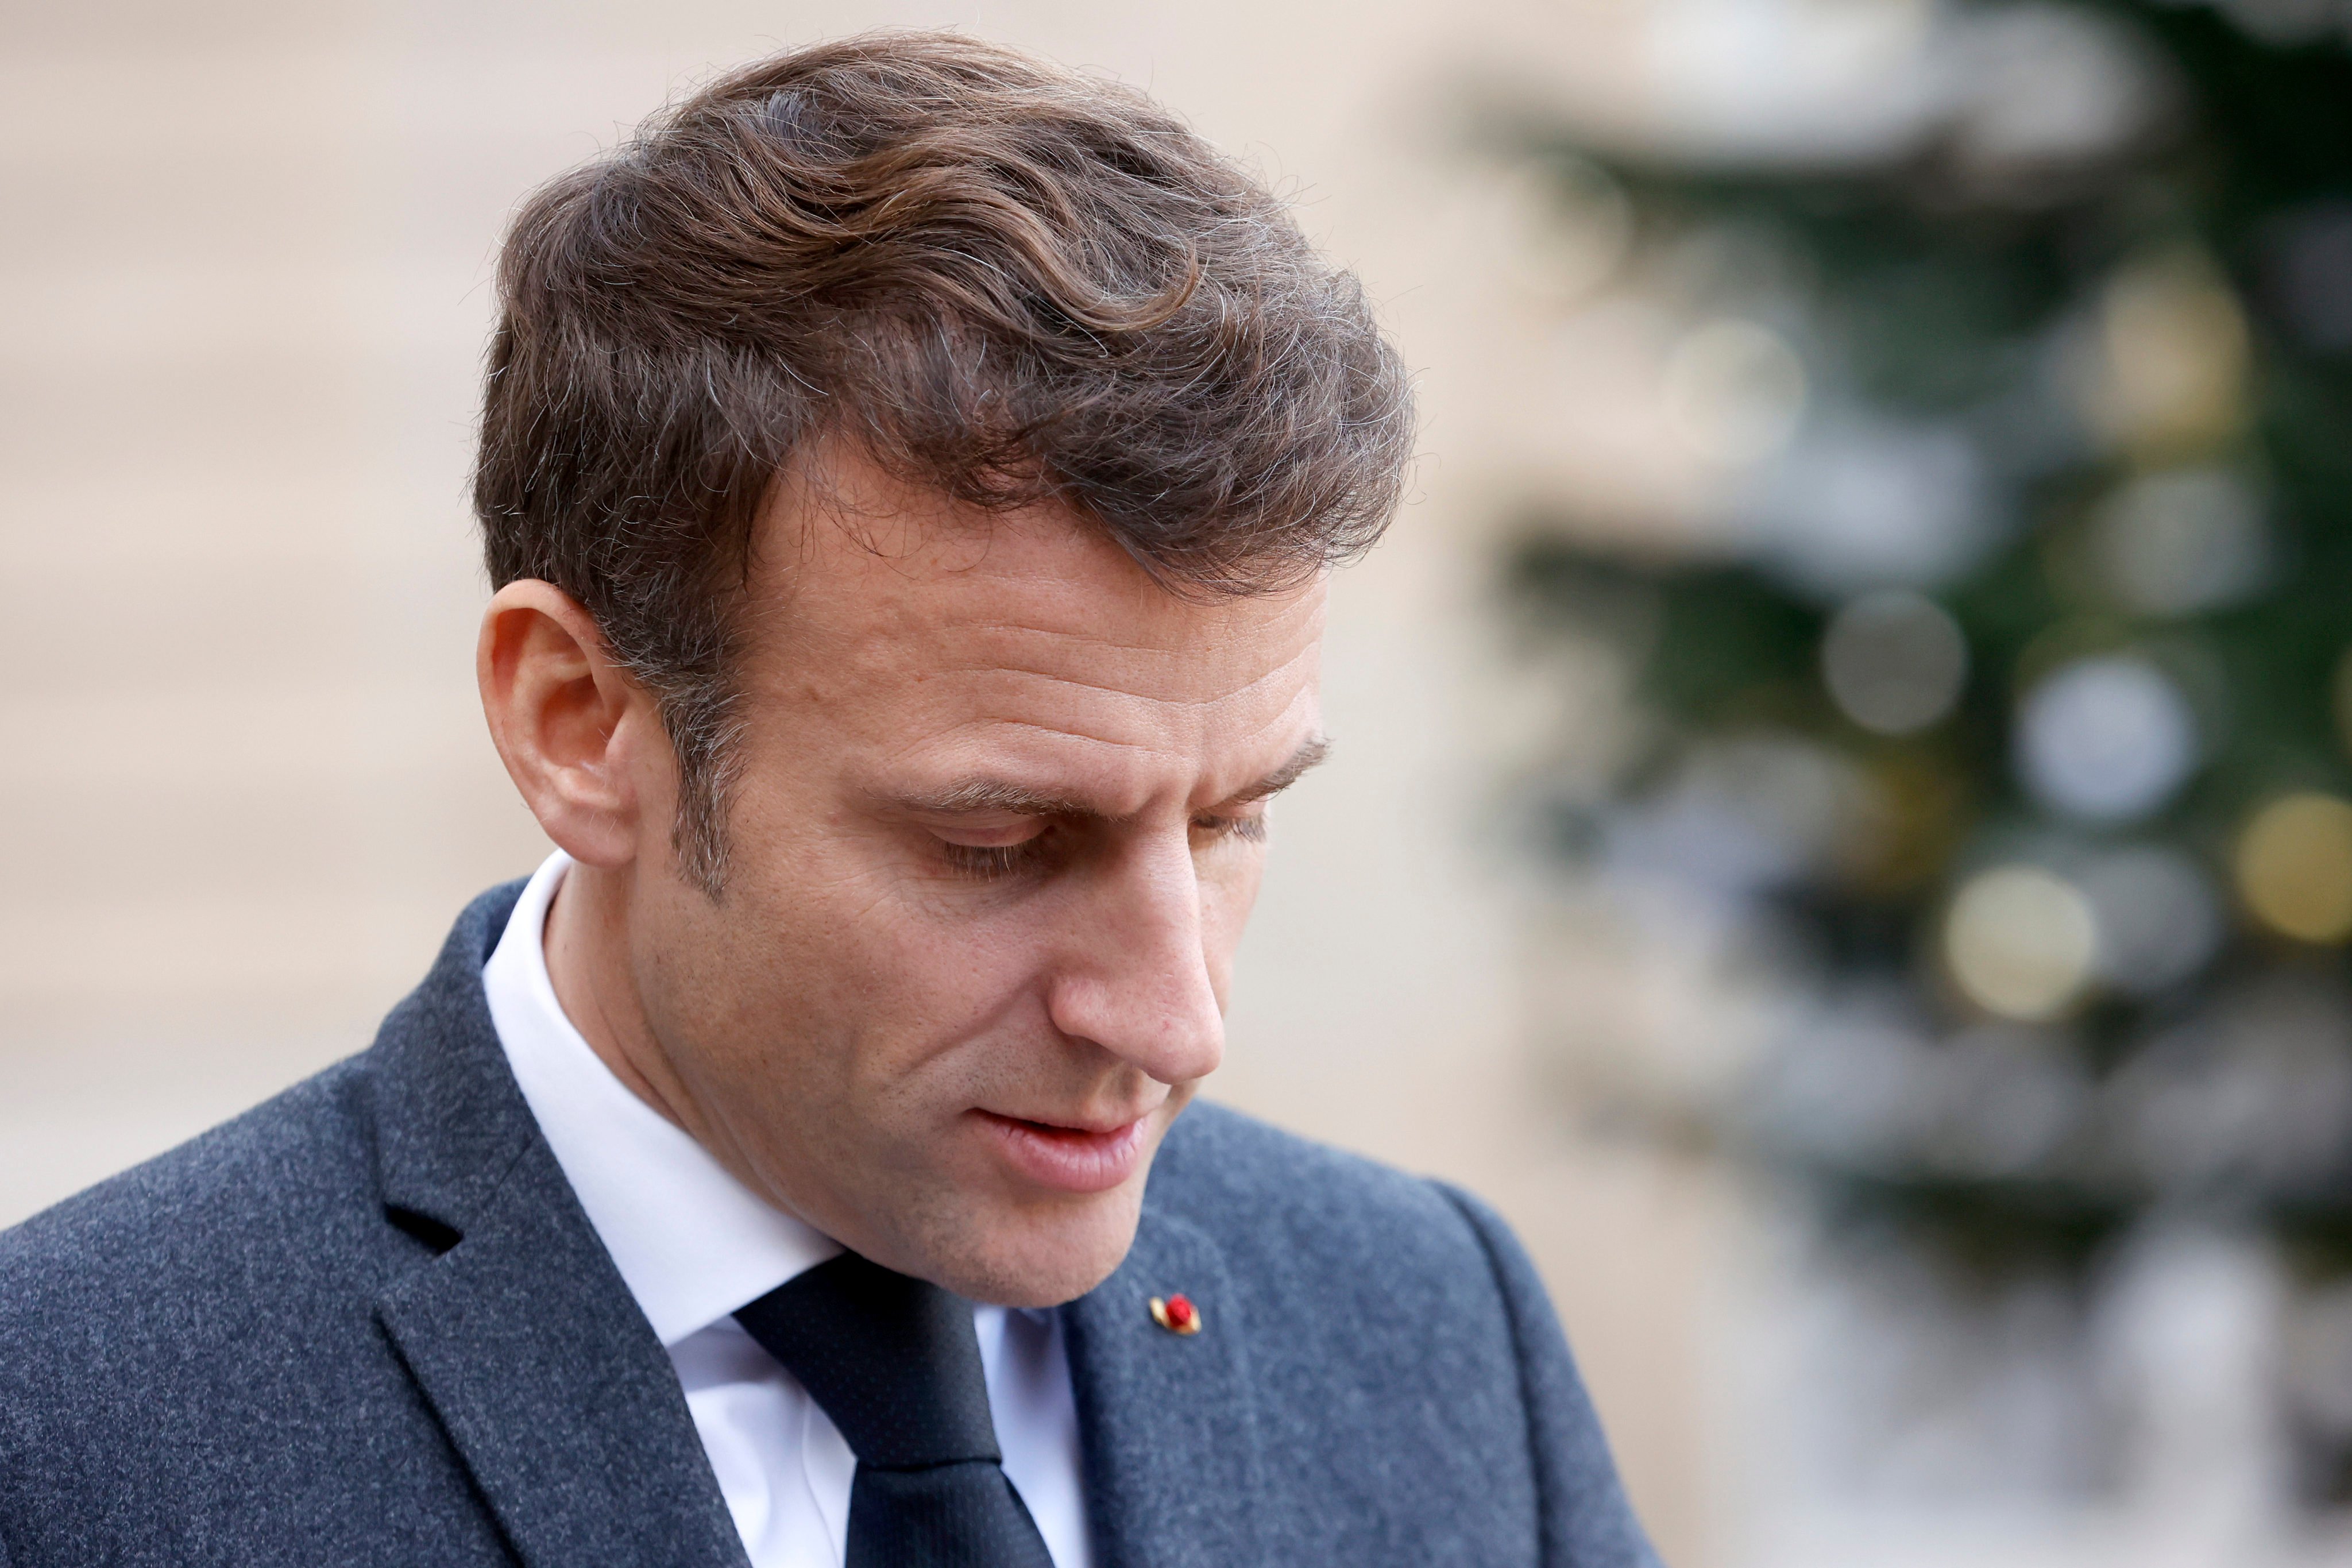 French President Emmanuel Macron has spawned an eponym, “macroner”, a verb meaning “to do a Macron”. Historically such coinages have been common, from Machiavellian to gerrymander. Photo: Getty Images